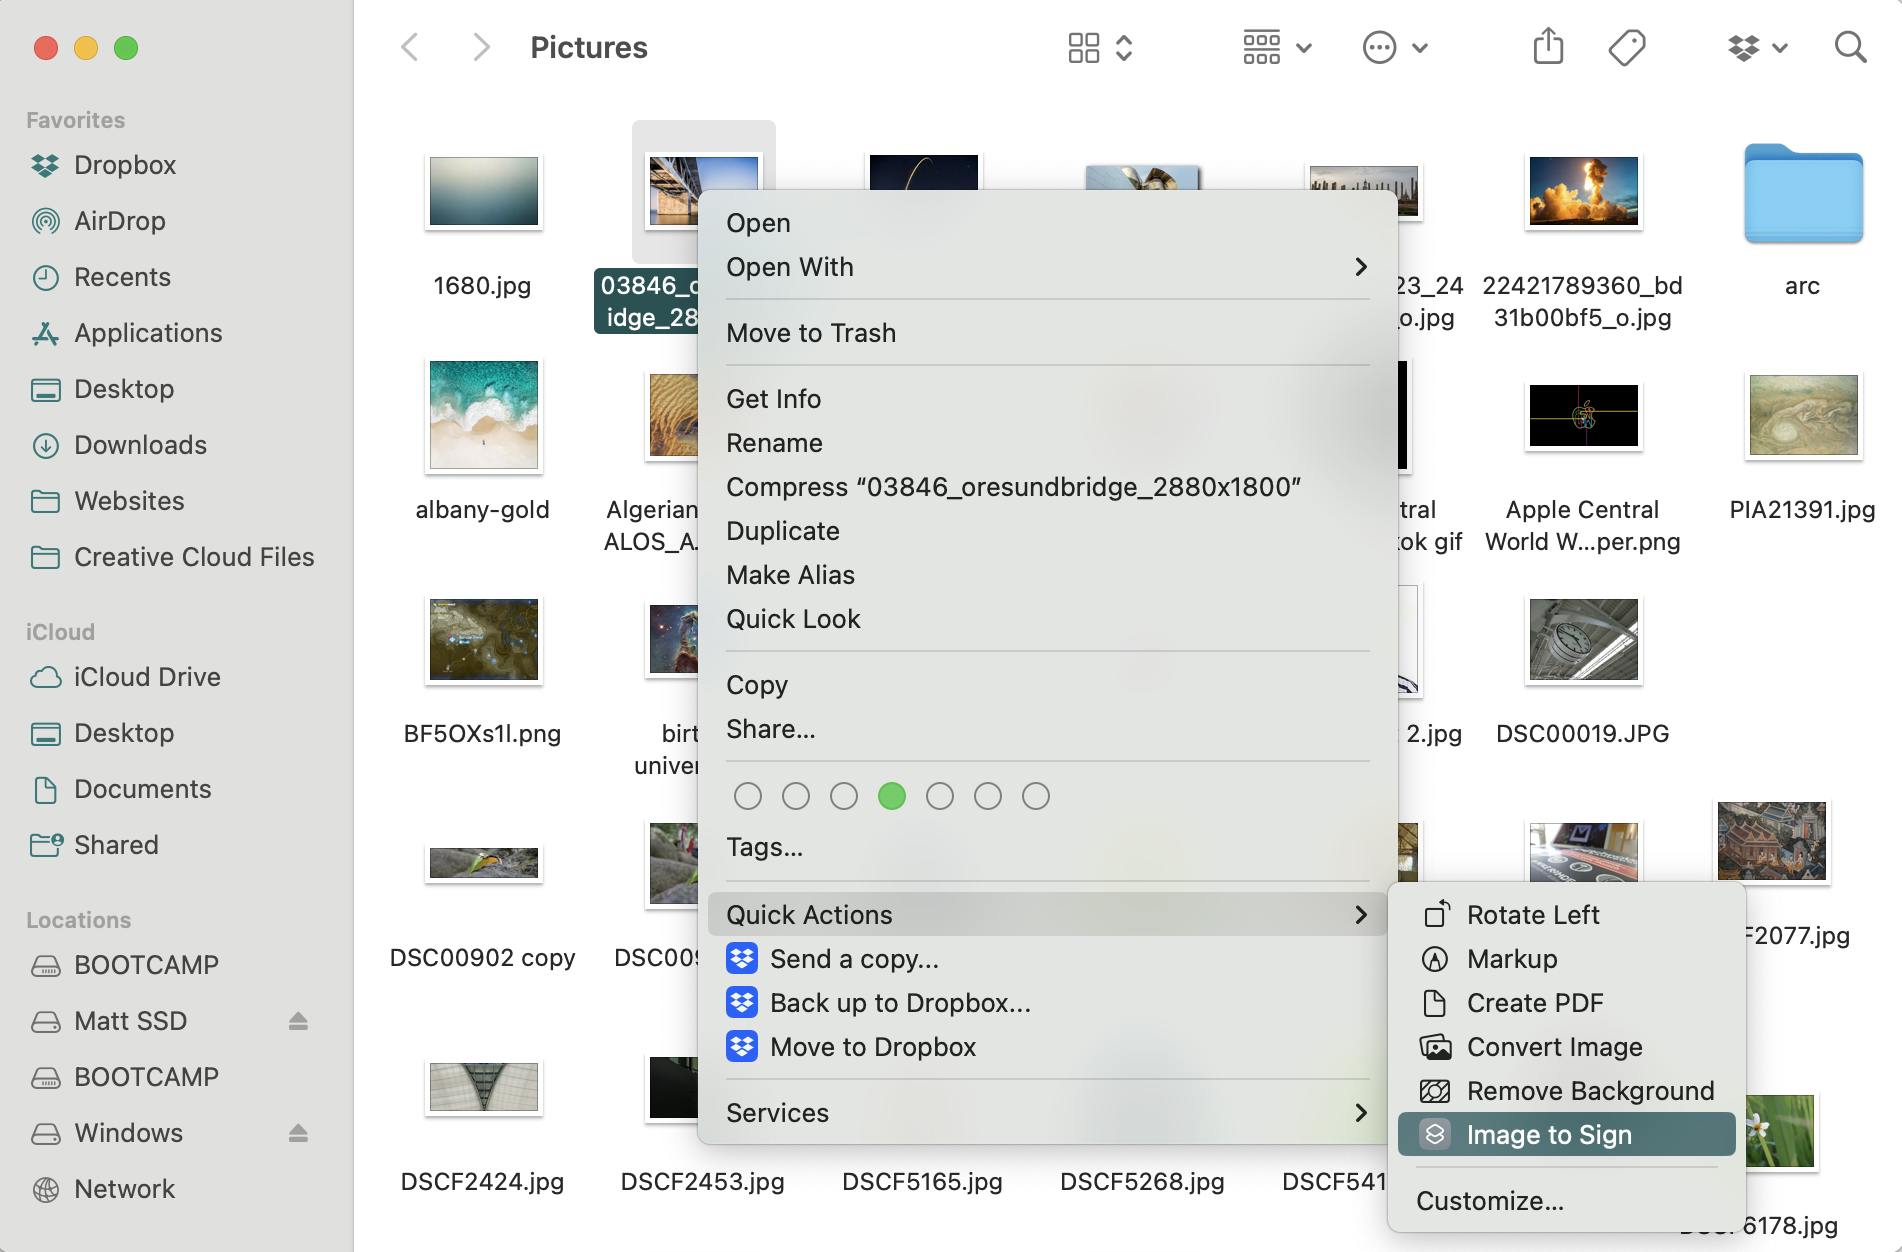 Right-click menu on Mac to send image to digital signage